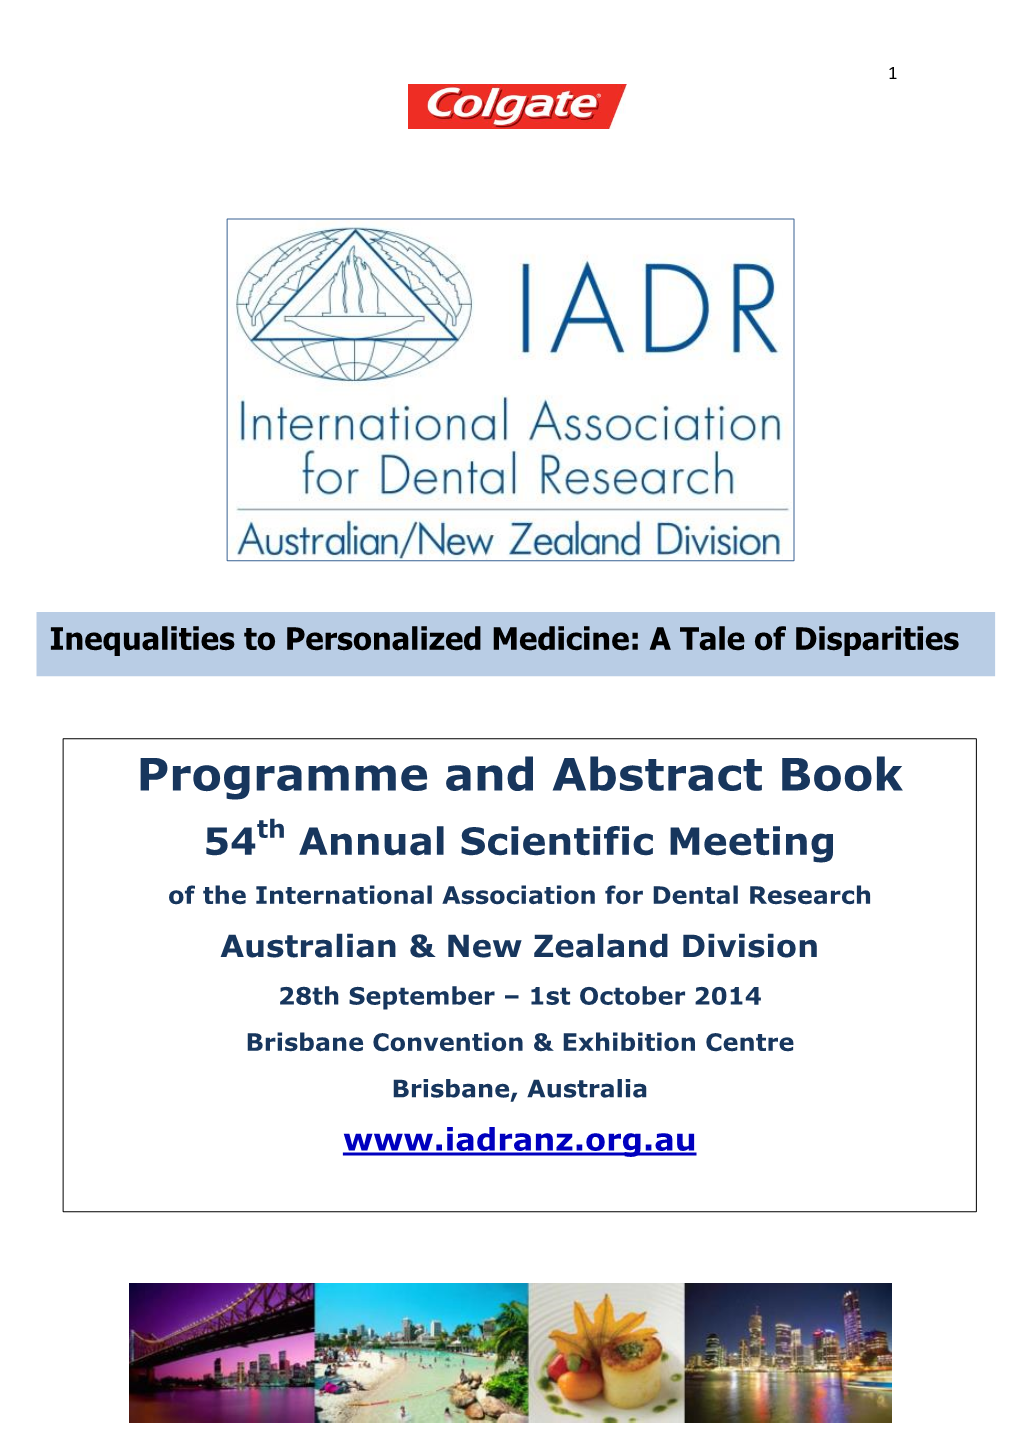 Programme and Abstract Book